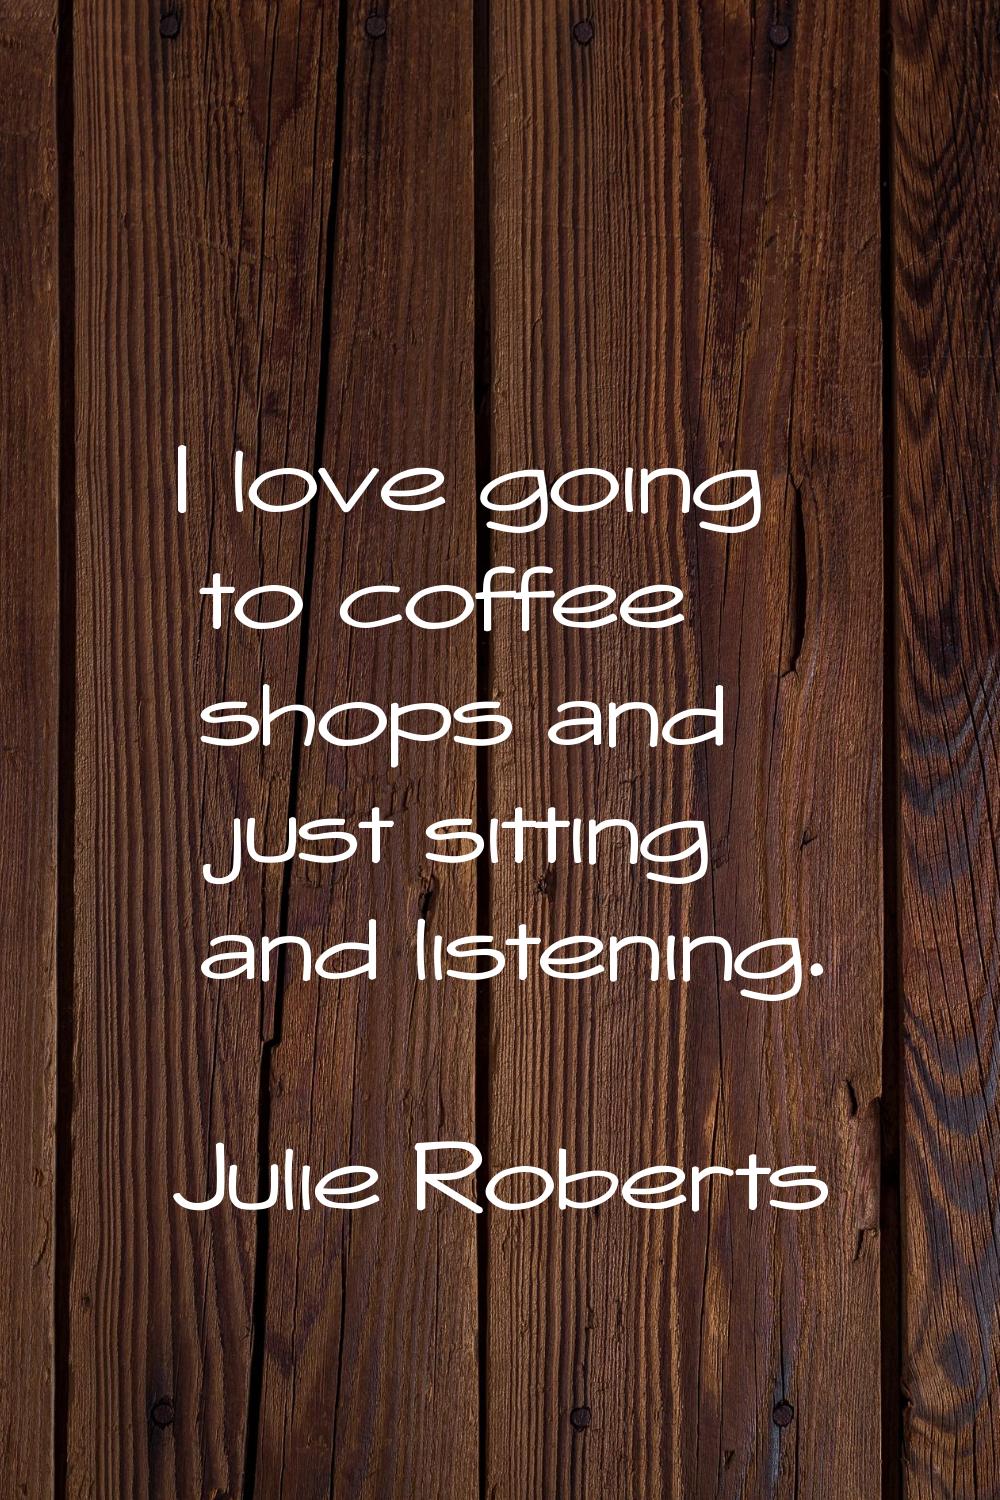 I love going to coffee shops and just sitting and listening.